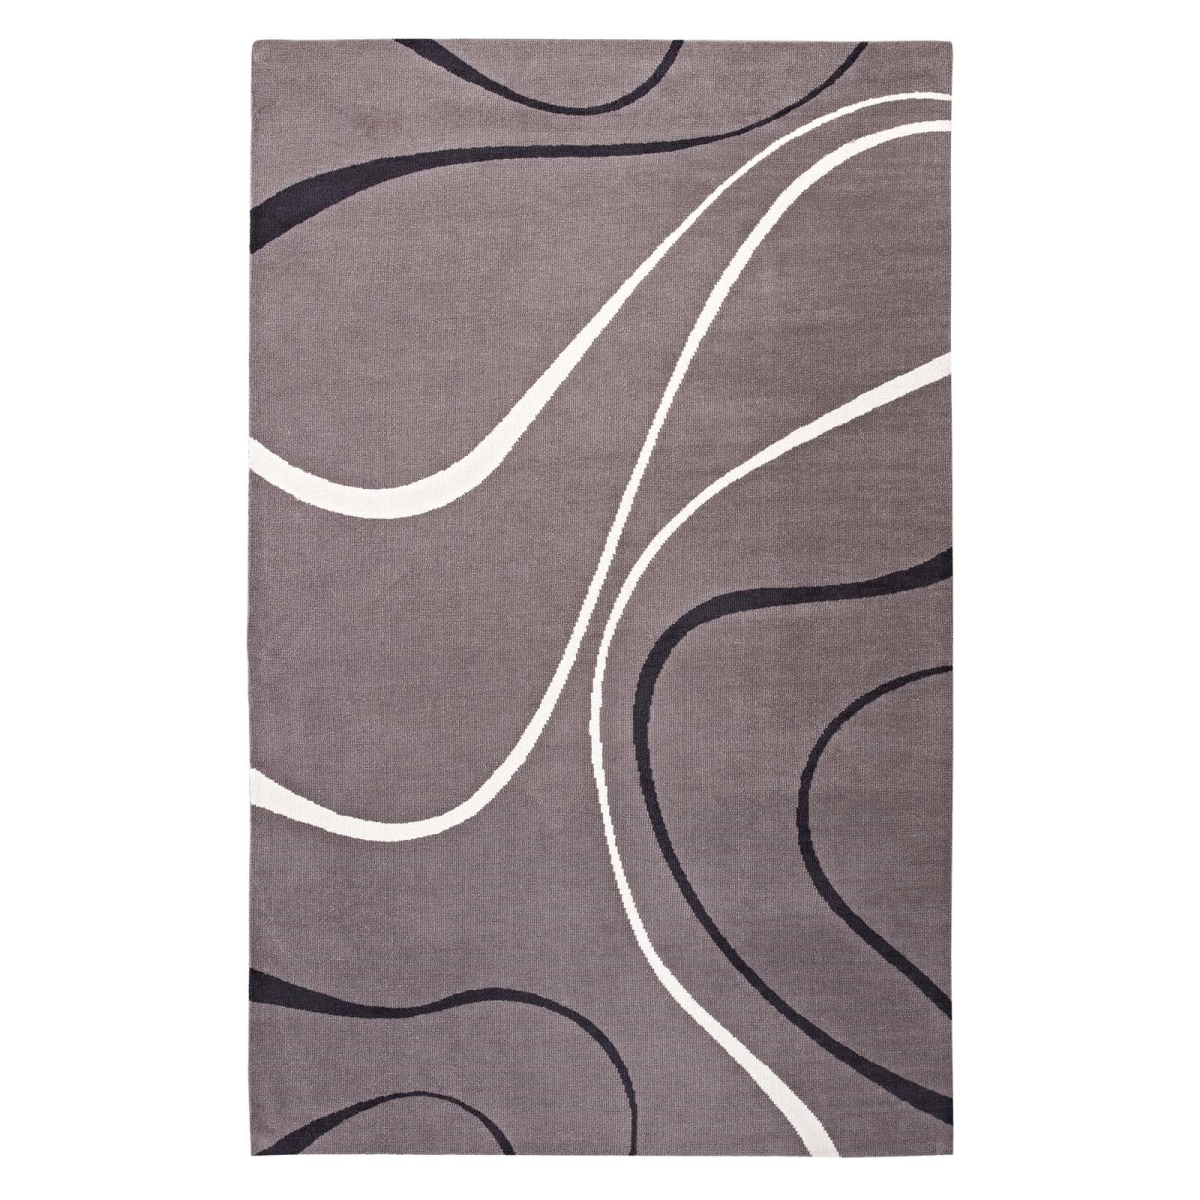 R-1002b-58 5 X 8 Ft. Therese Abstract Swirl Polyester Area Rug - Charcoal, Black & Ivory, 0.5 X 60 X 96 In.